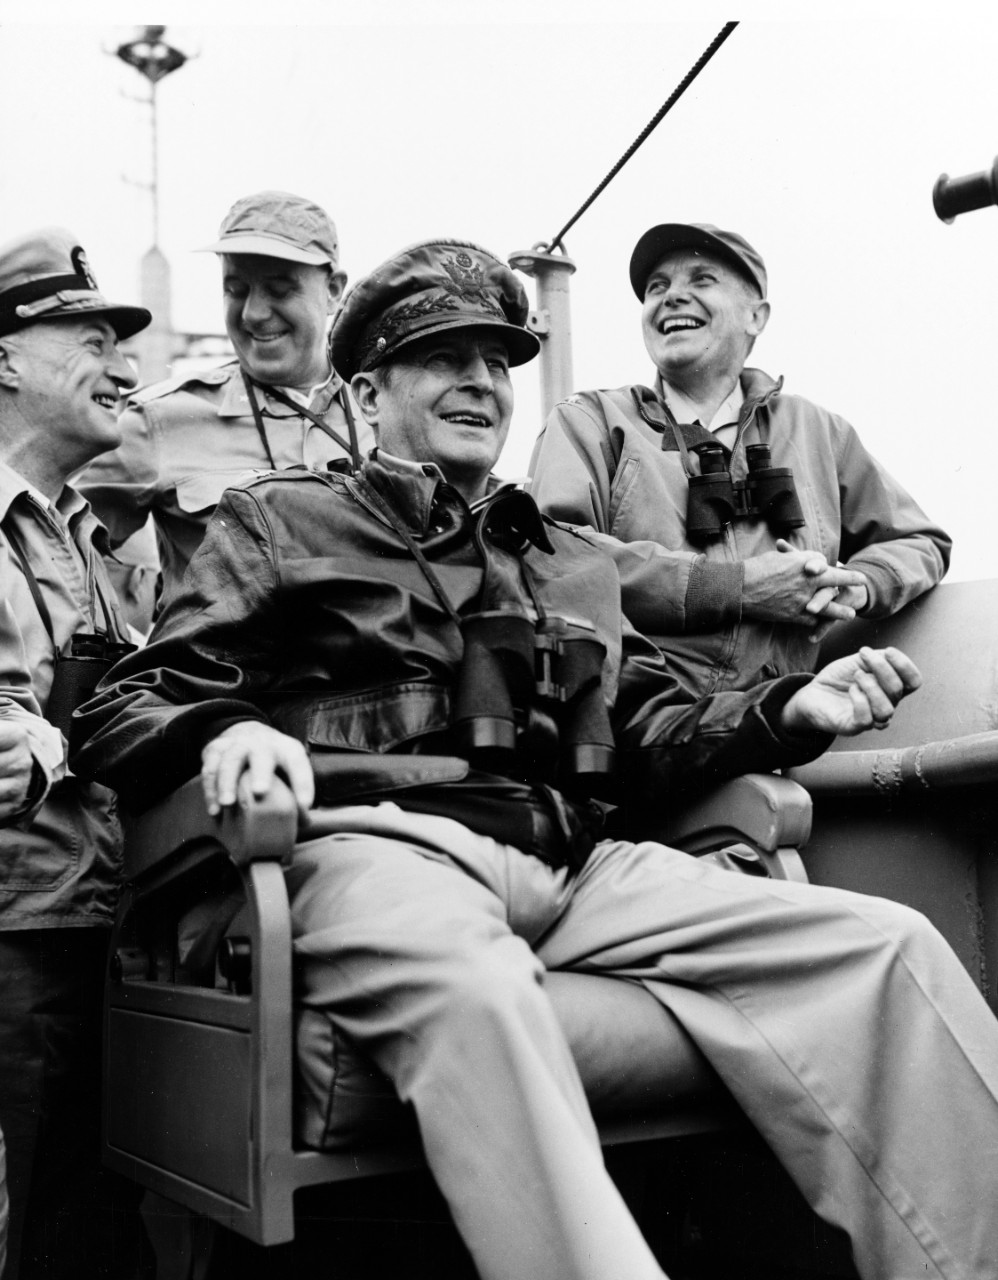 General of the Army Douglas MacArthur (seated, center), Commander-in-Chief, Far East Command, on board USS Mount McKinley (AGC-7) during the Inchon landings, 15 September 1950.